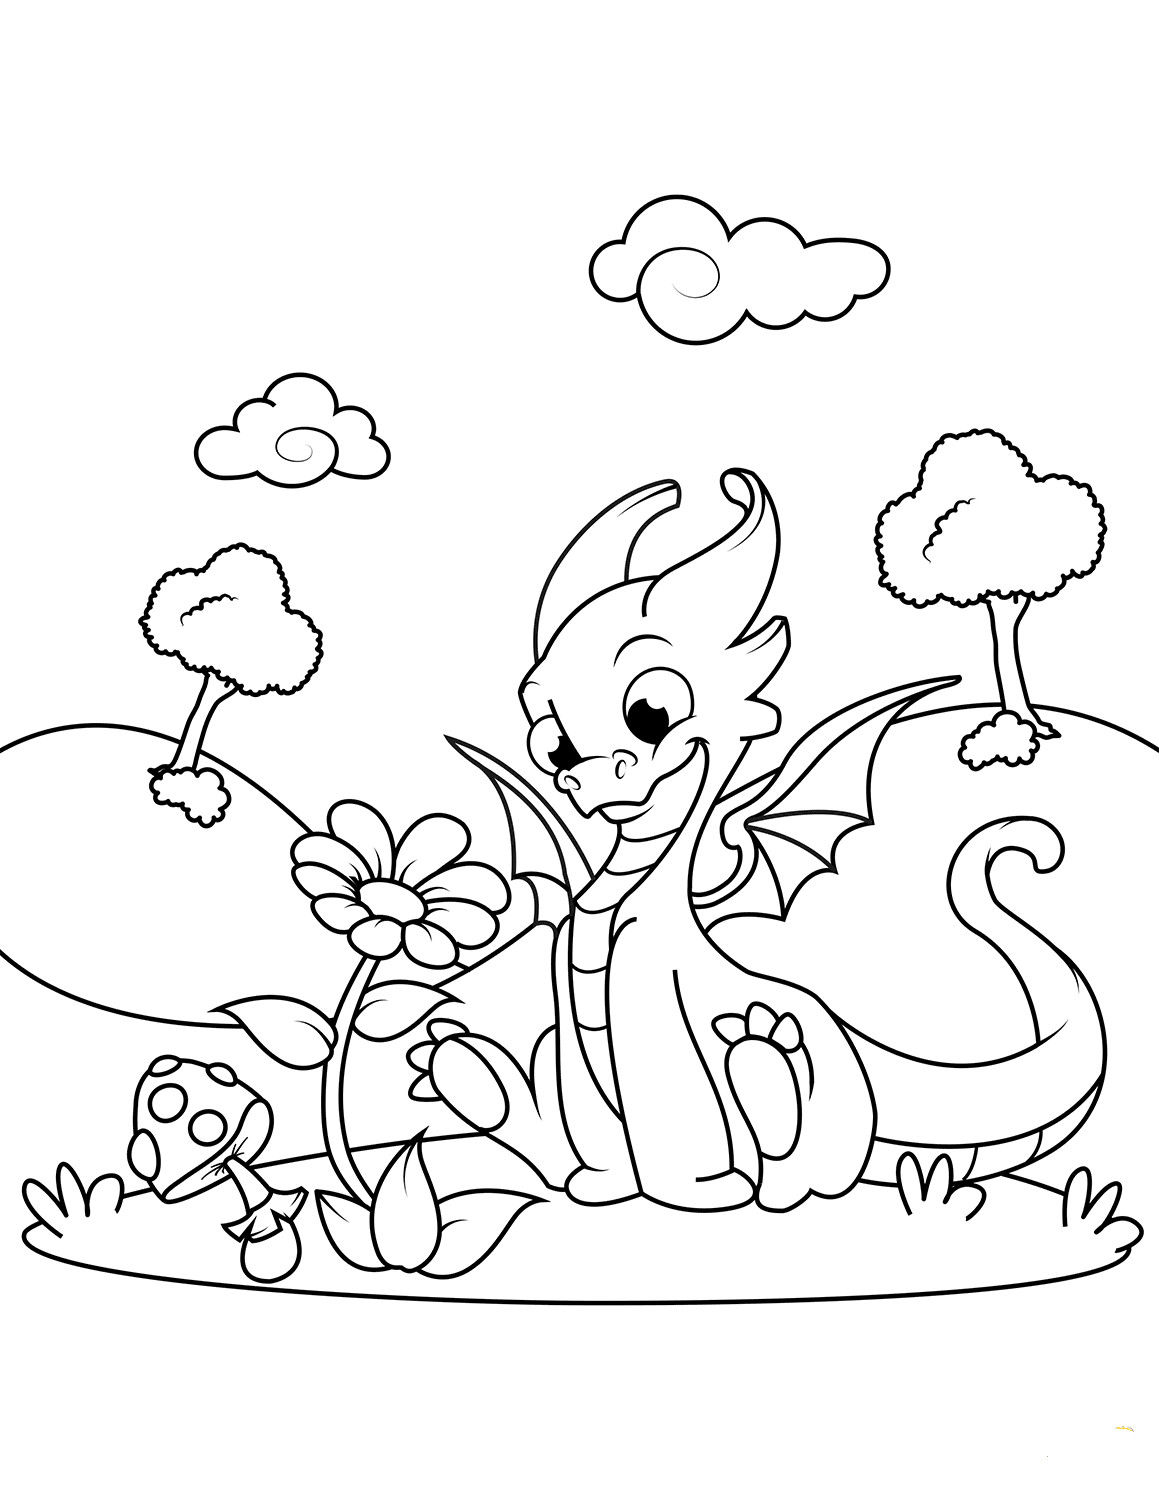 Dragon Coloring Pages Free Printable
 35 Free Printable Dragon Coloring Pages